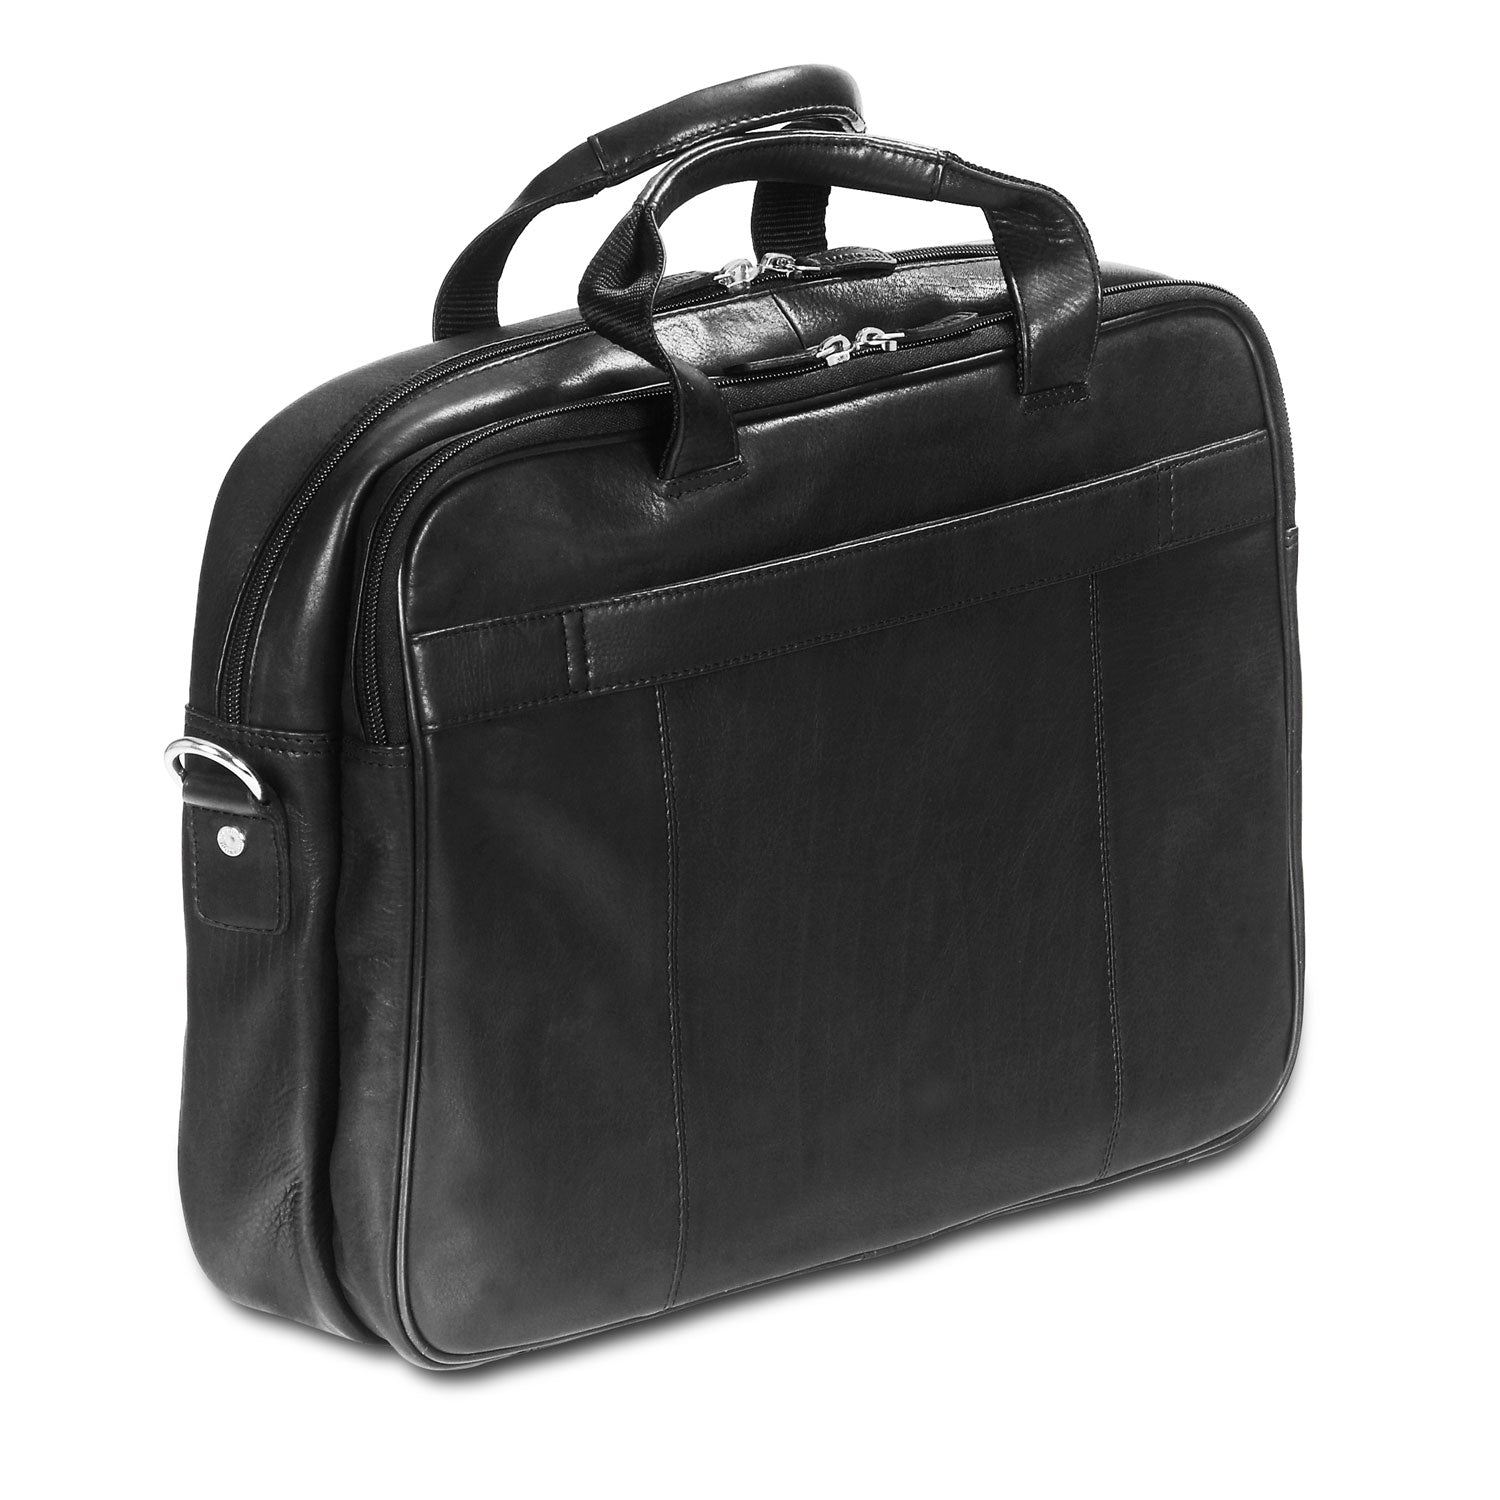 Mancini Leather Zippered Double Compartment for 15.6" Laptop / Tablet, 15.75" x 4.25" x 11.5", Black